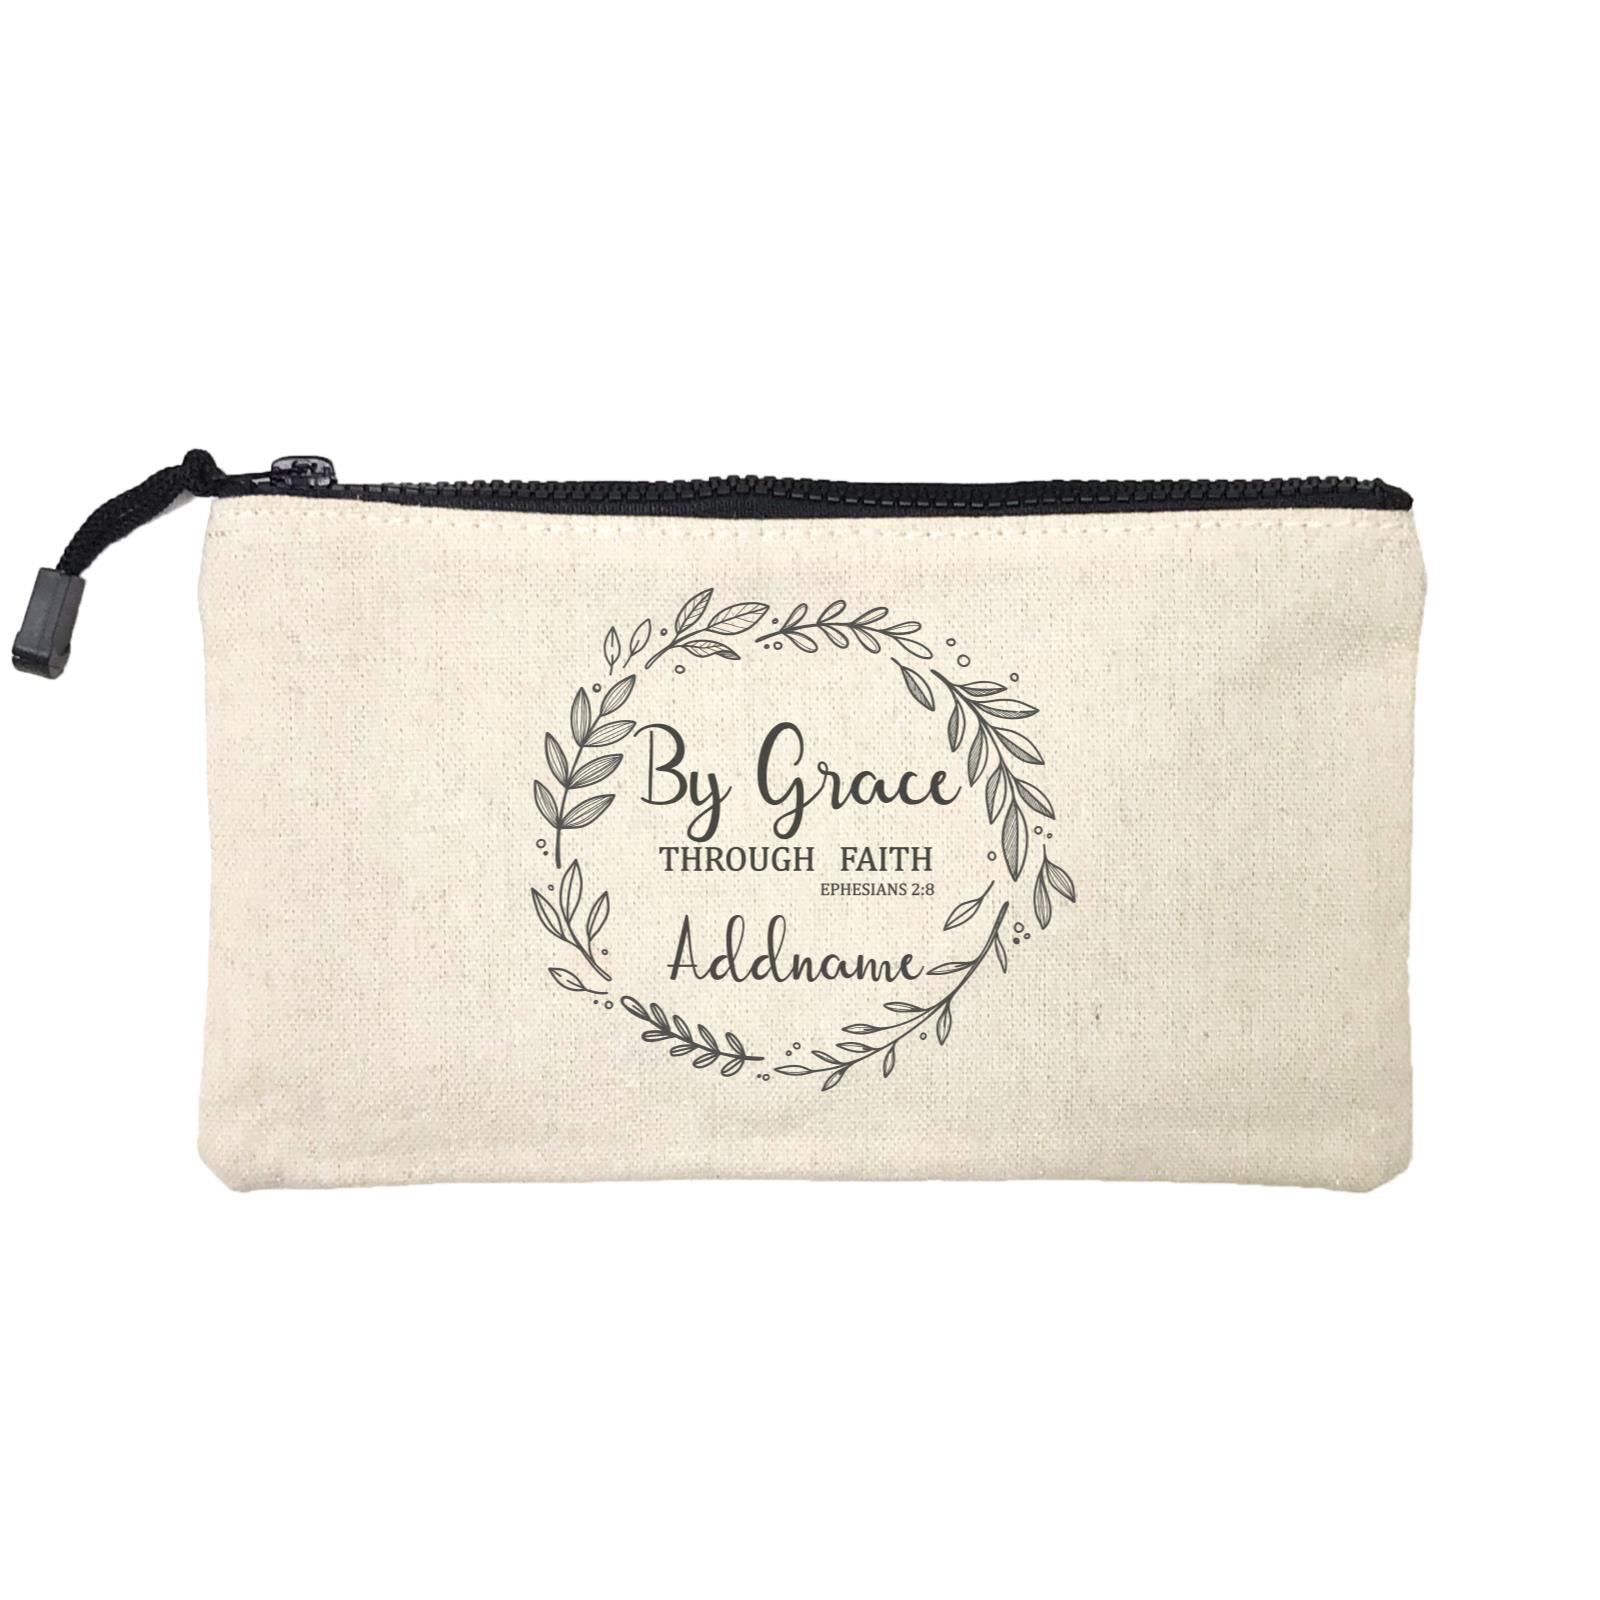 Christian Series By Grace Through Faith Ephesians 2.8 Addname Mini Accessories Stationery Pouch